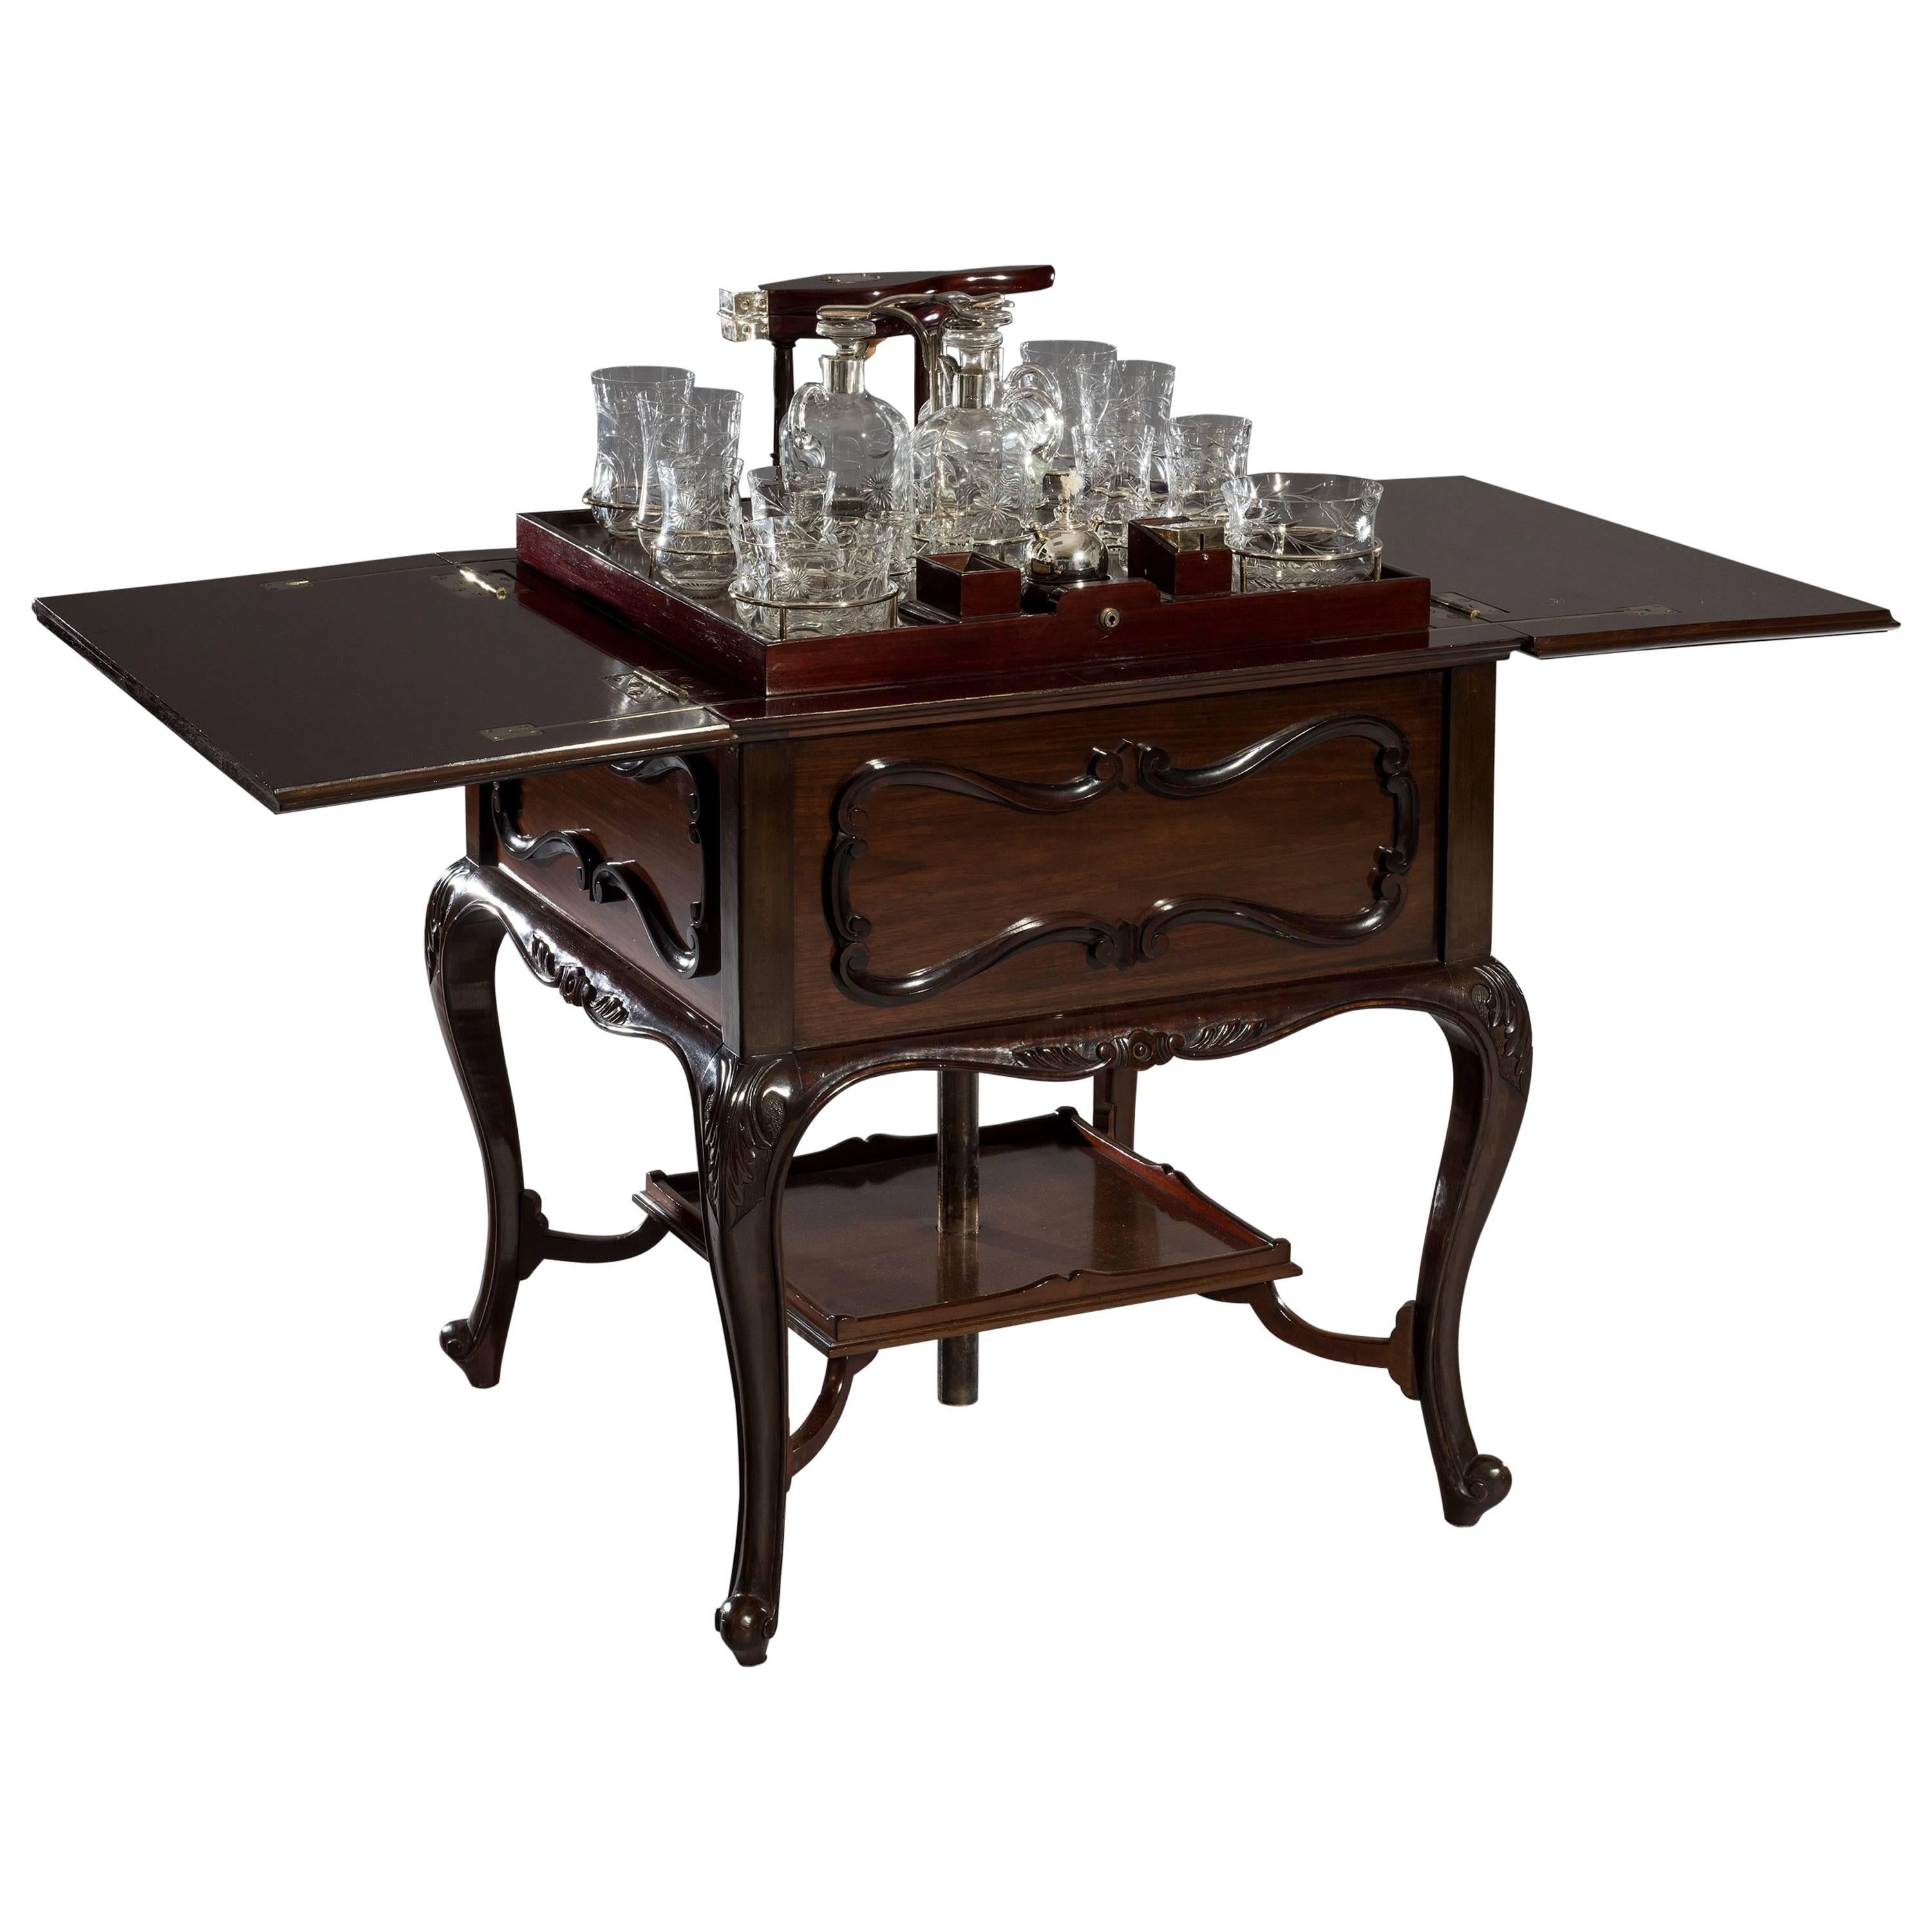 Decorative 20th Century Mahogany Surprise Table on Cabriole Legs For Sale